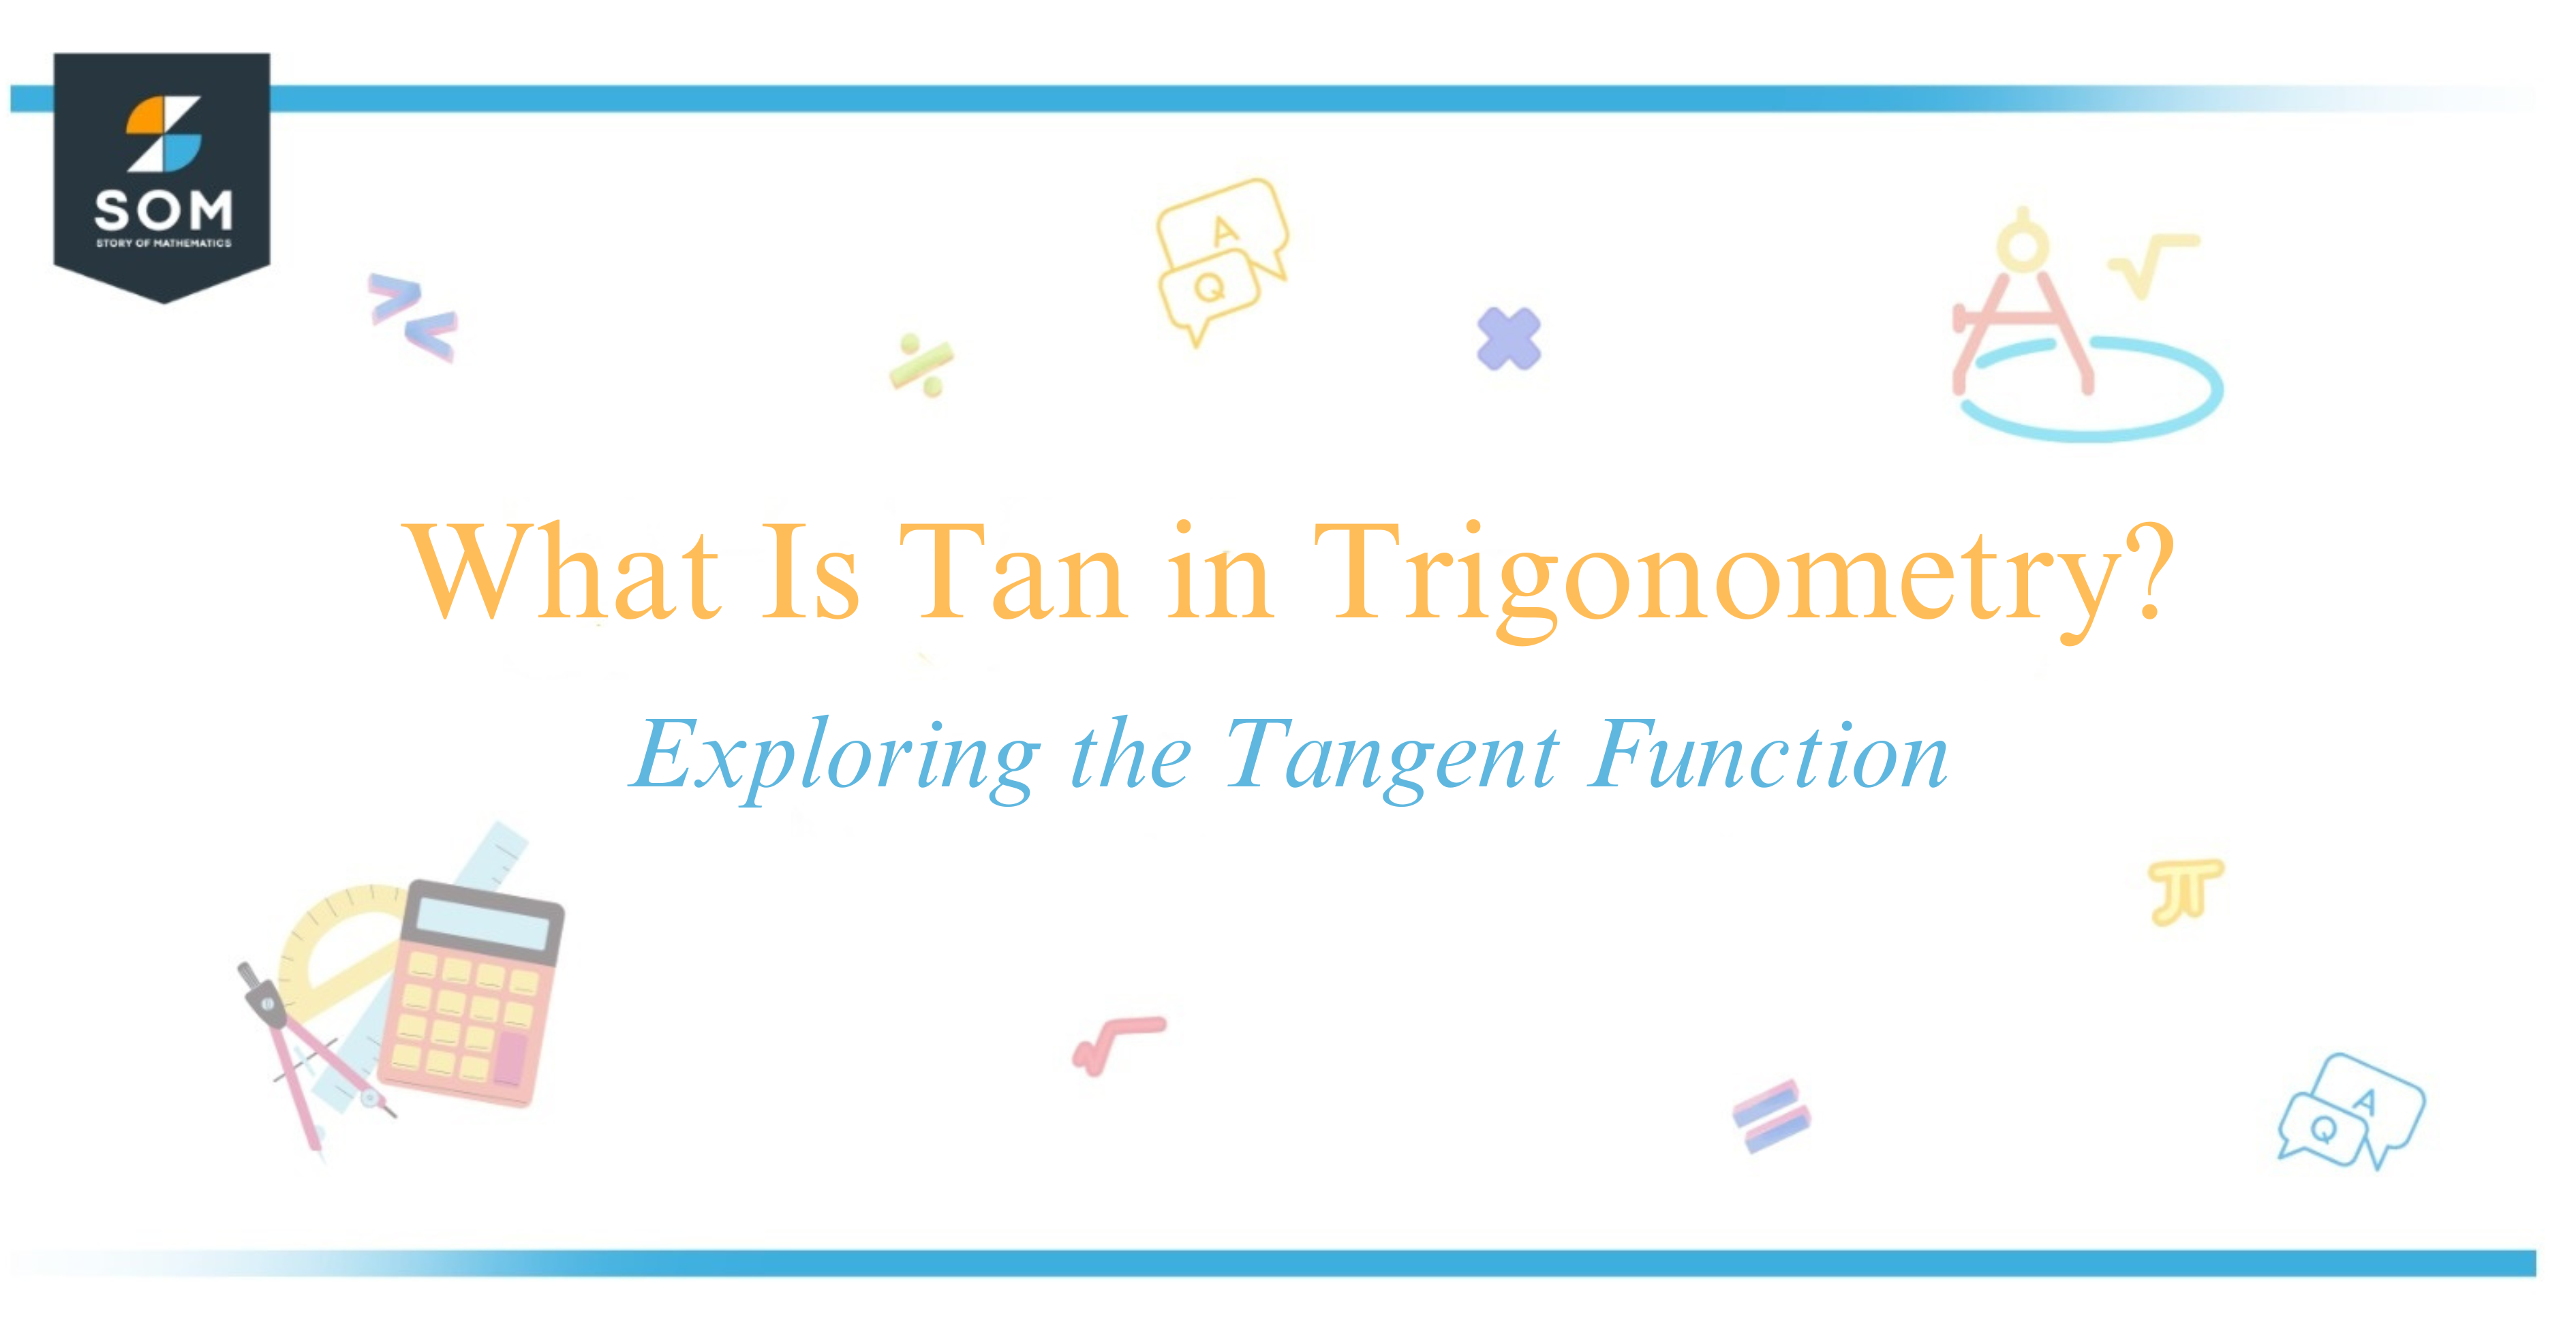 What Is Tan in Trigonometry Exploring the Tangent Function